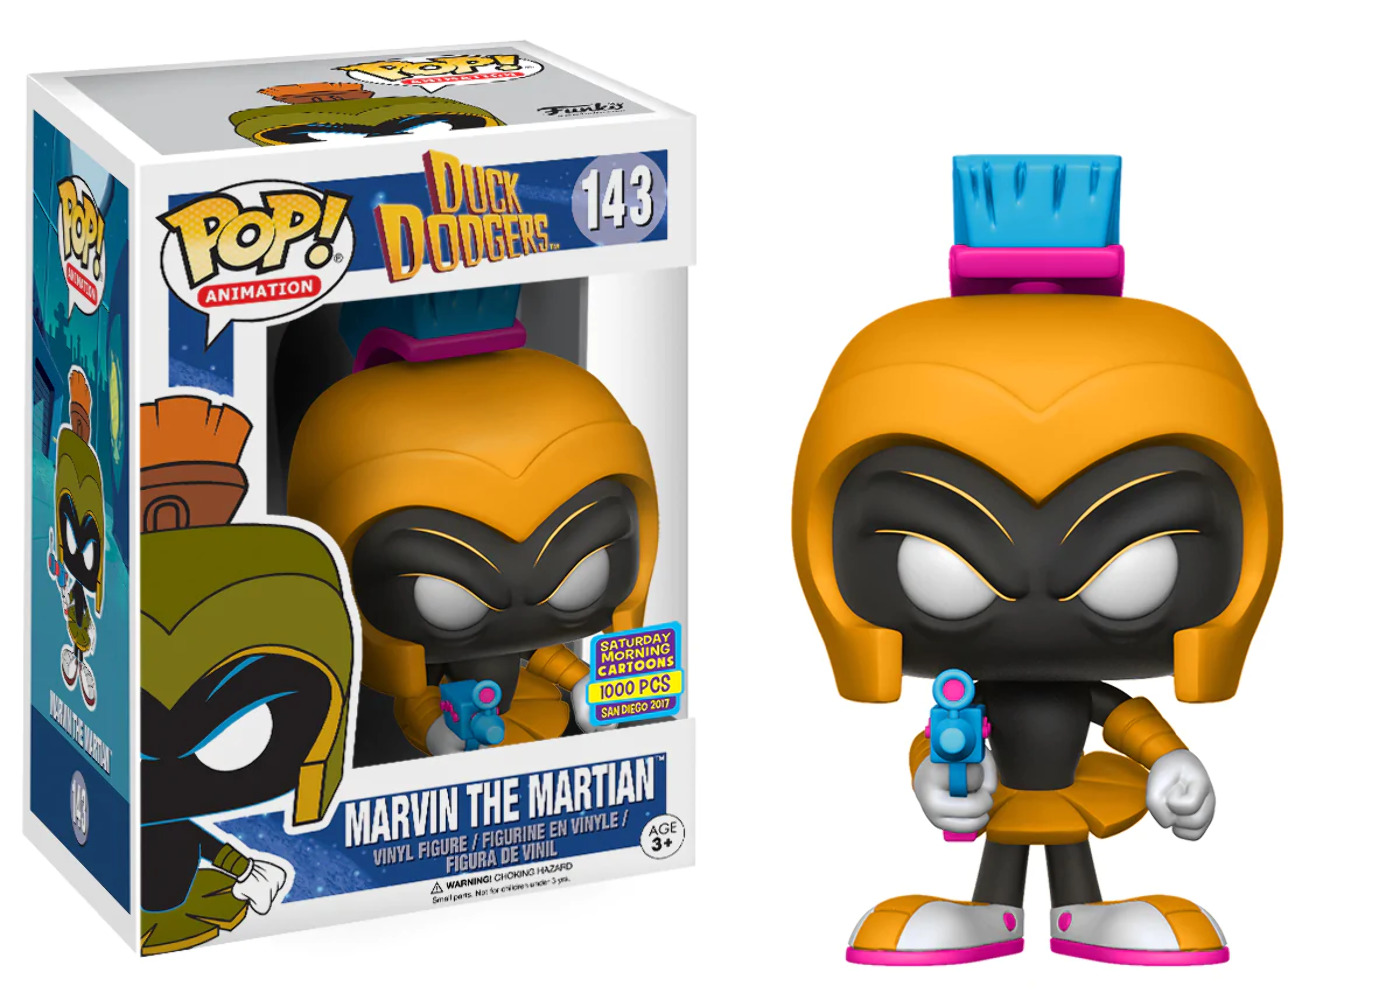 Funko POP Animation: Duck Dodgers - Marvin the Martian (2017 SDCC)(Damaged Box)